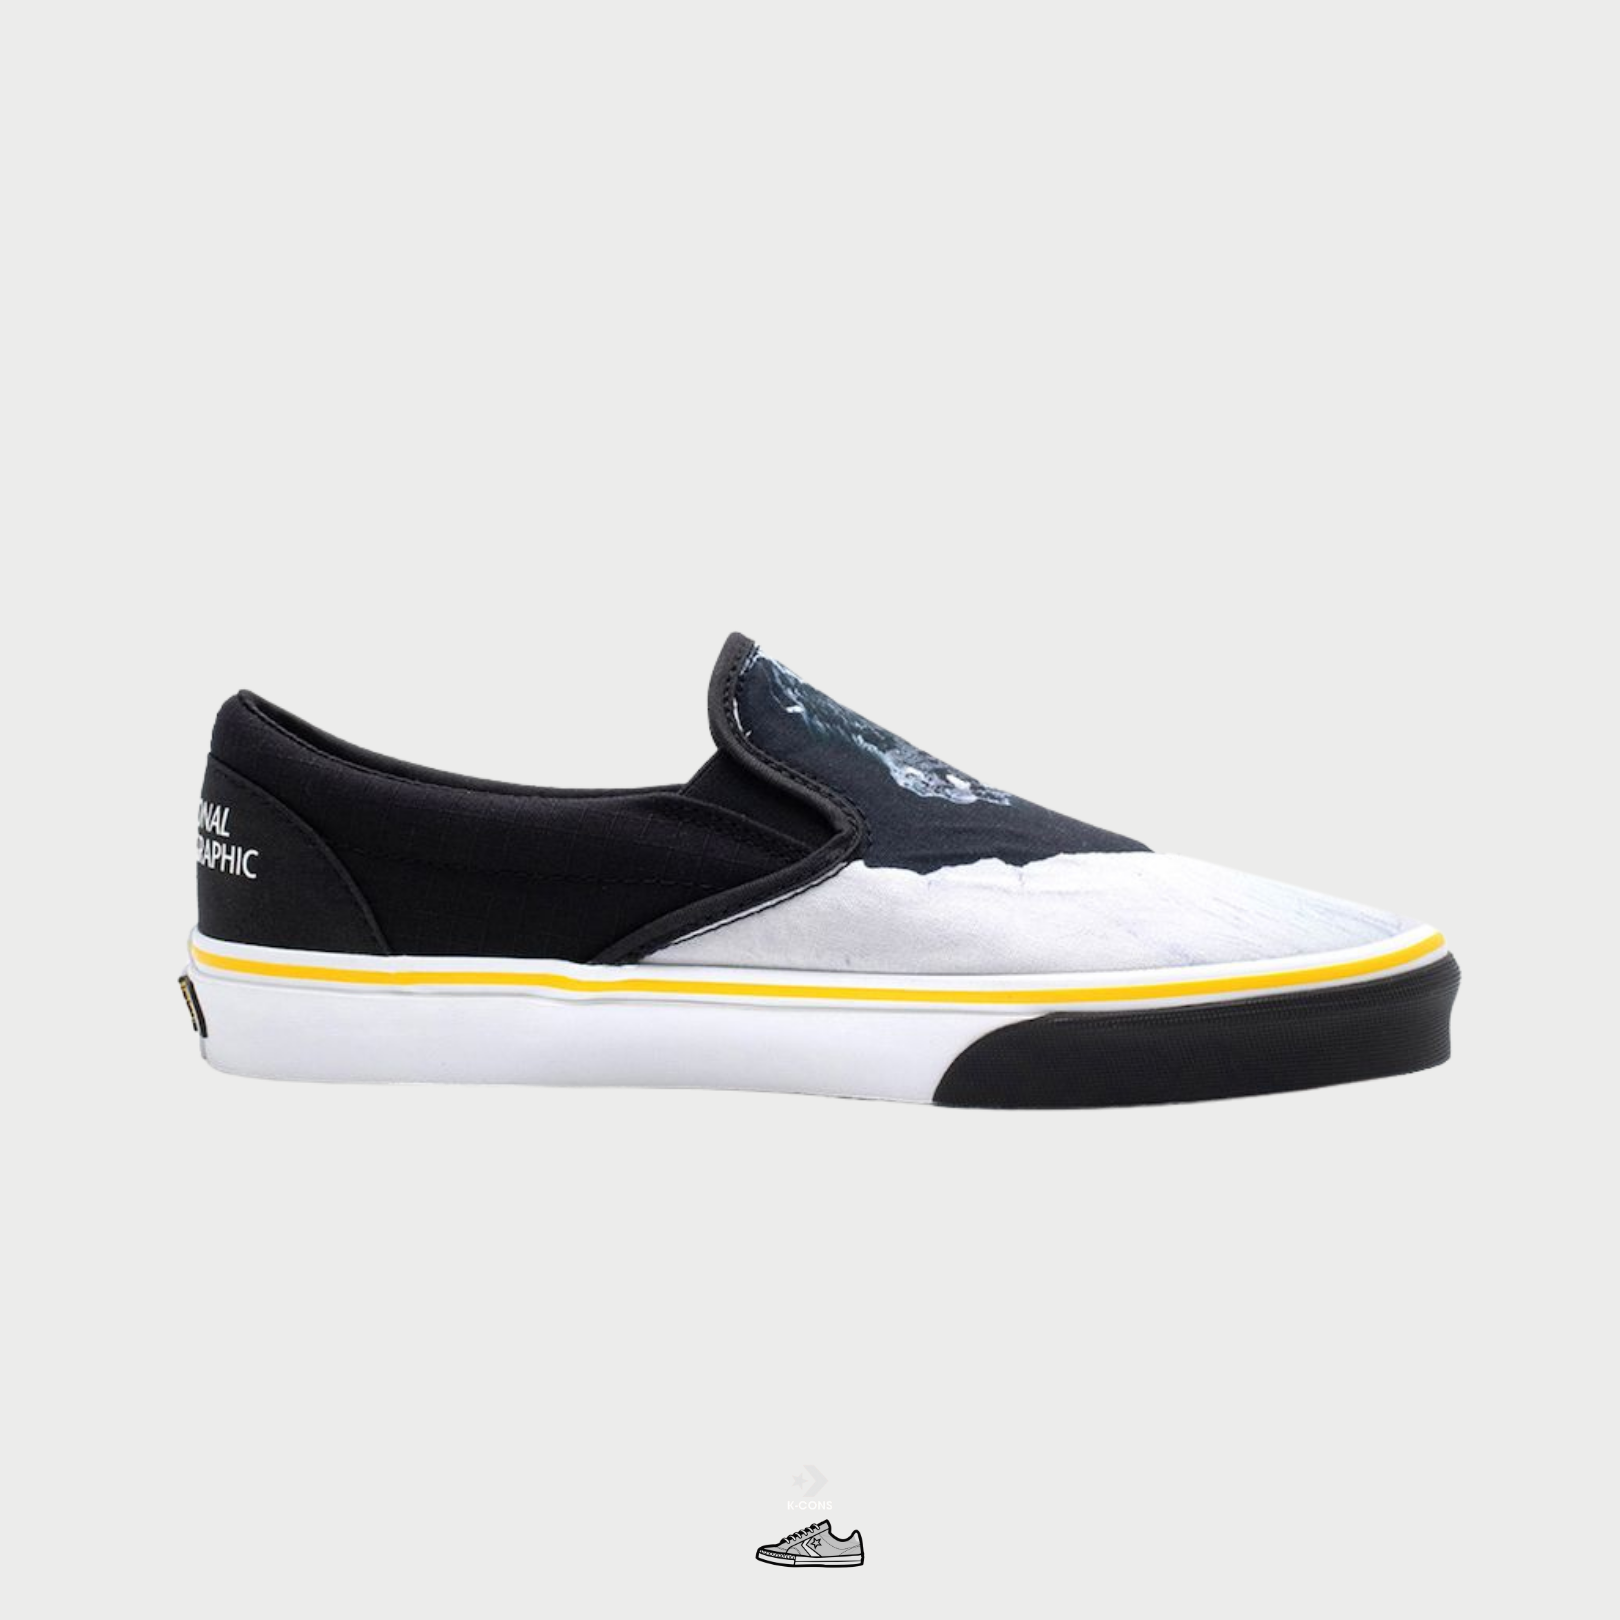  Giày Vans x National Geographic Classic Slip-on Then 